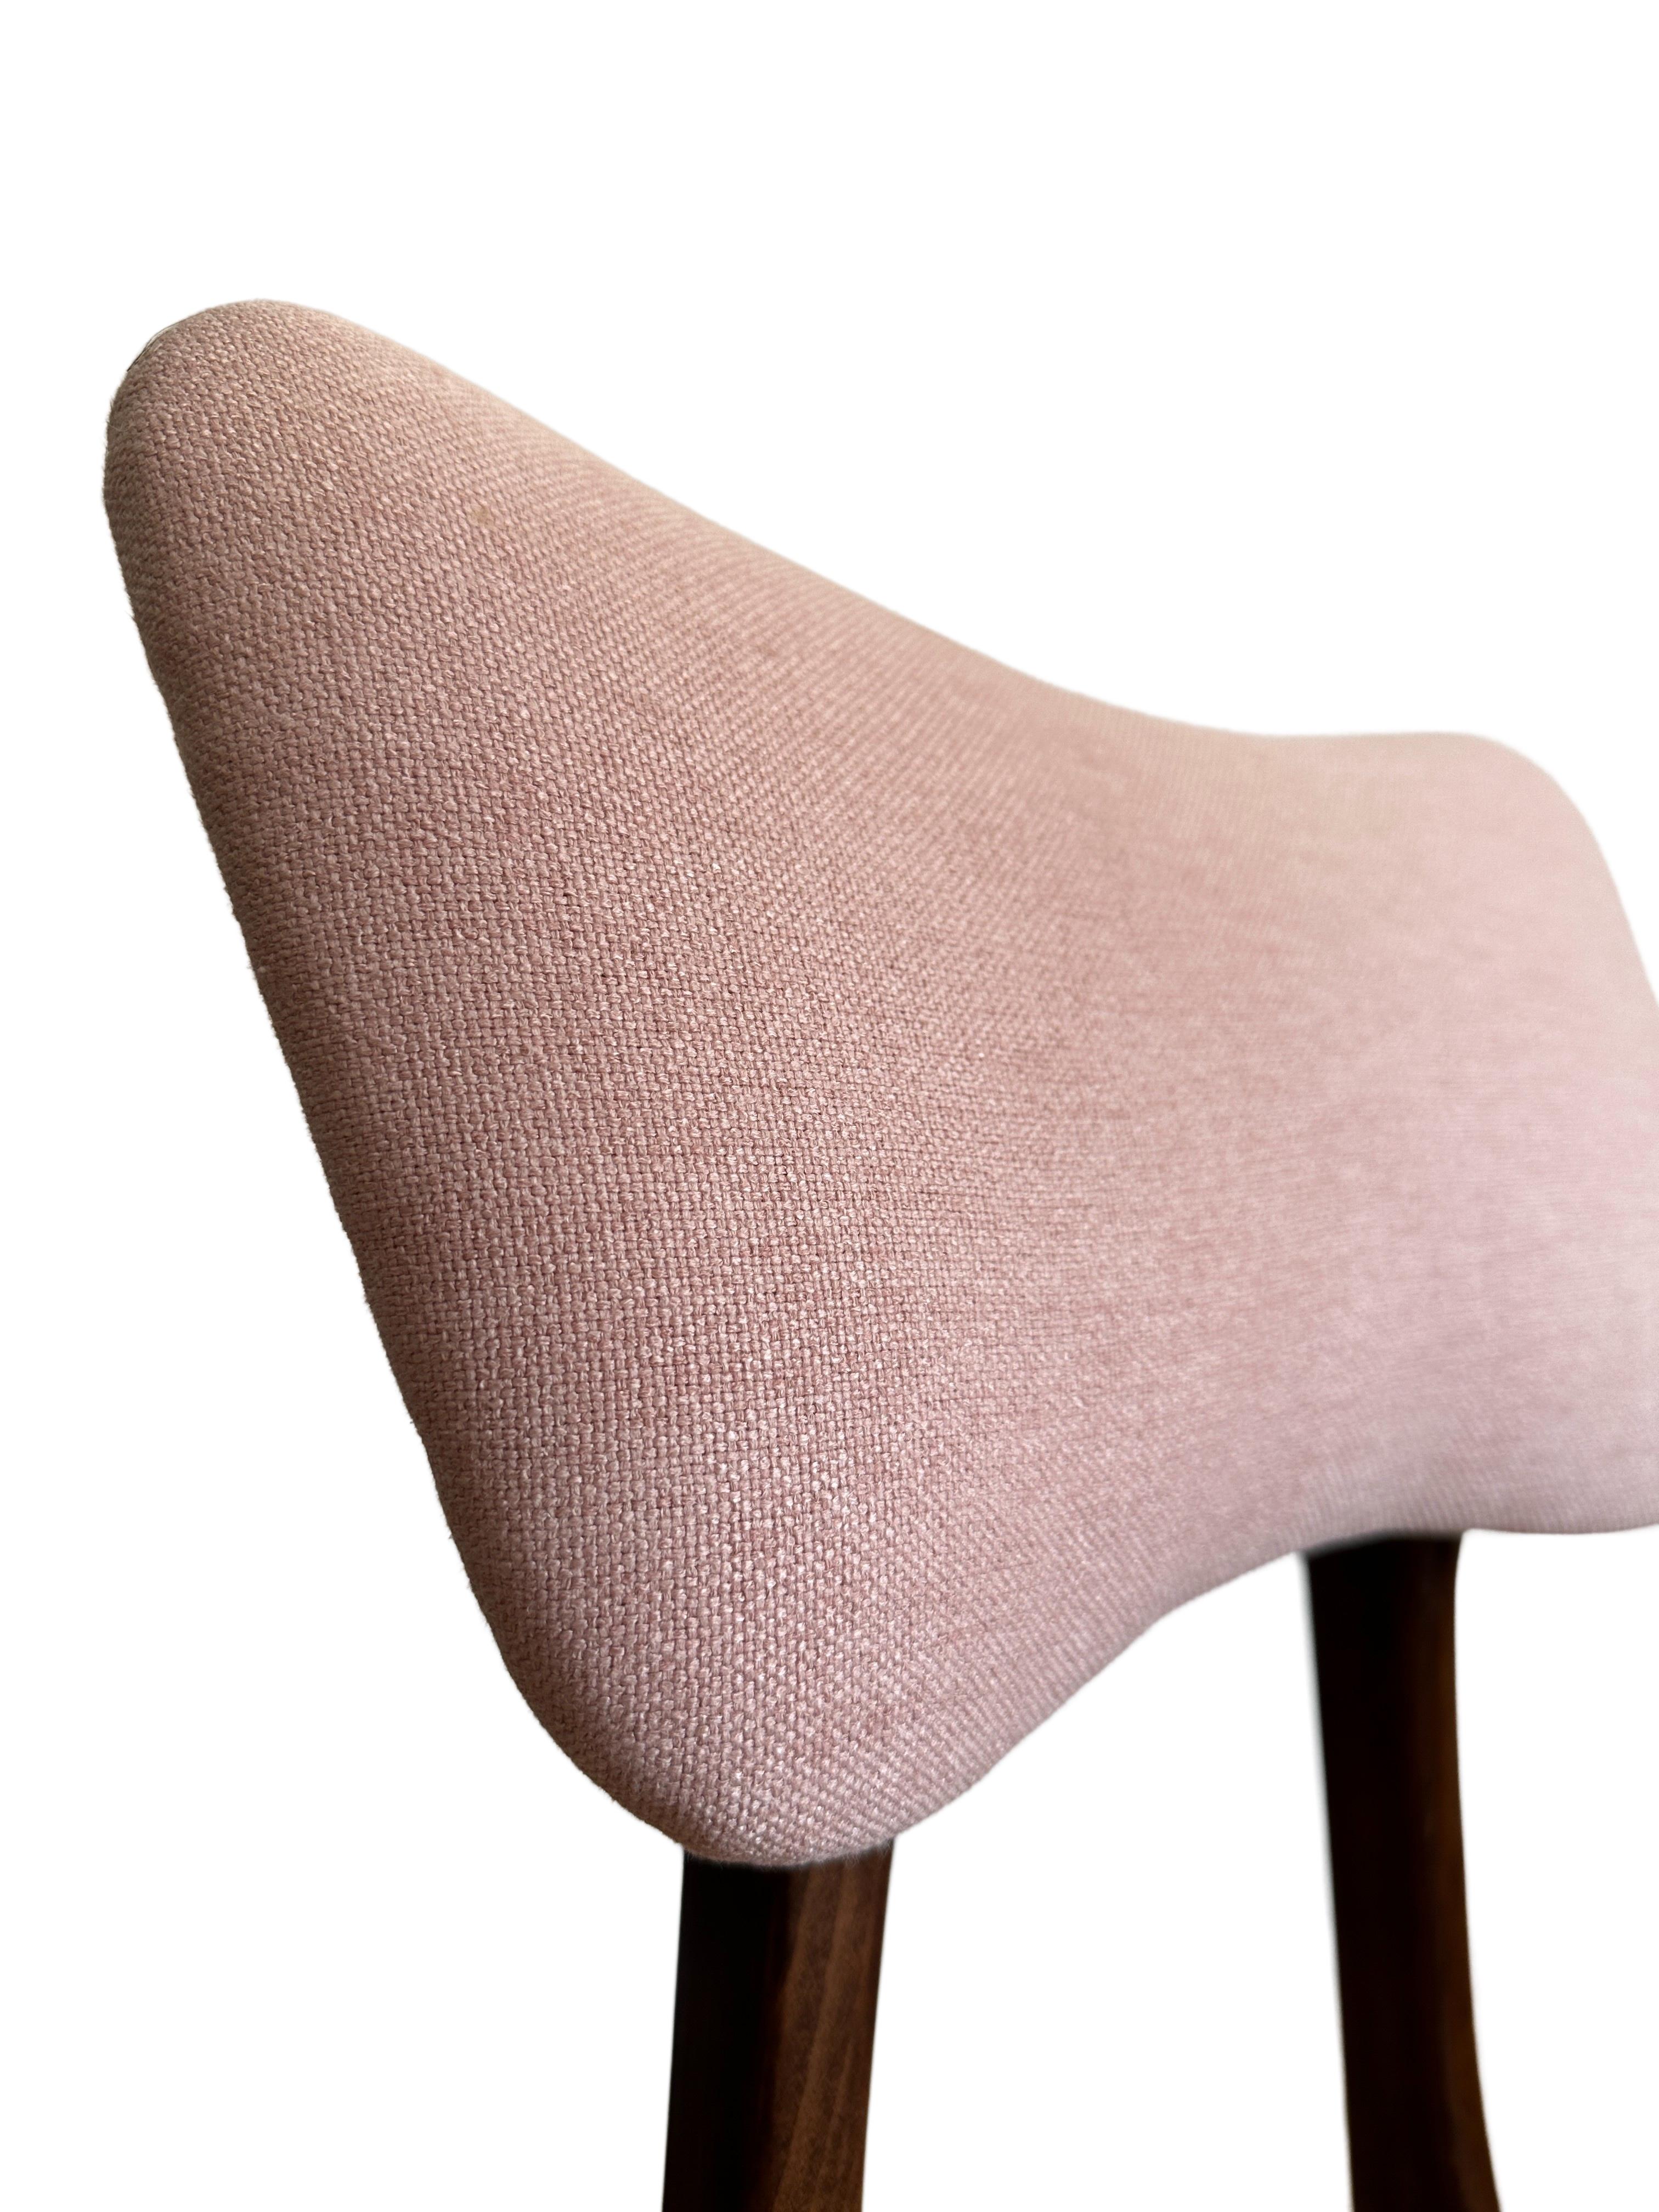 Unique chair manufactured in Poland in the 1960s, designed by Rajmund Halas. 

The upholstery is made of fabric with an interesting structure of thickly woven canvas, nice and soft to the touch. The fabric is covered with a protective finish that